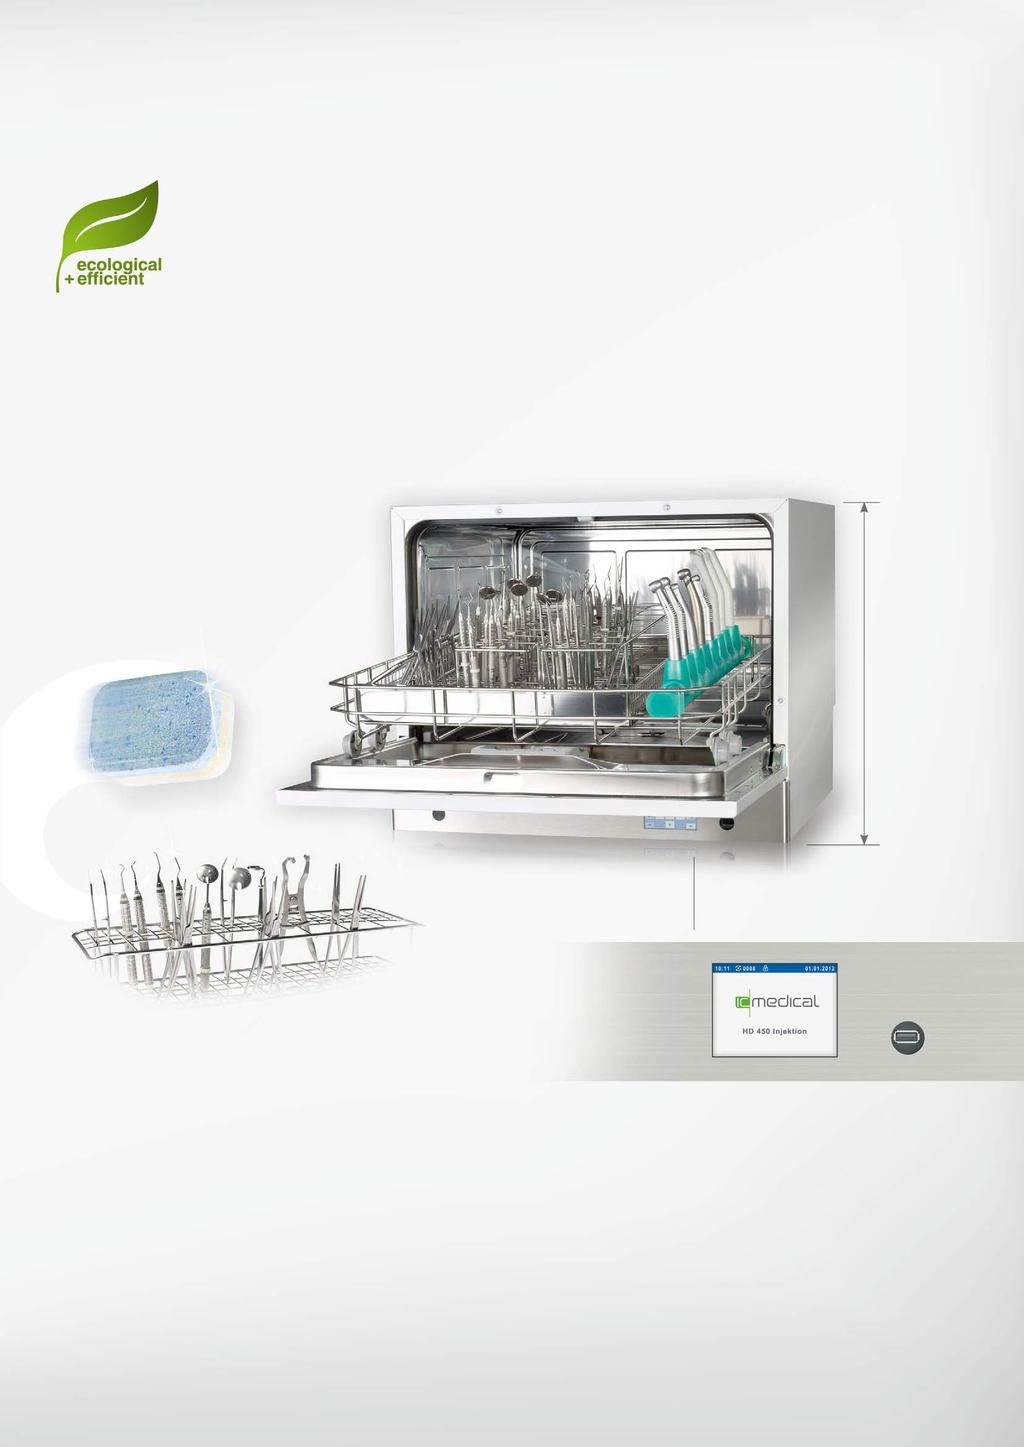 The intelligent solution for dental and specialist practices Compact and space-saving design can be used as a tabletop or built-in device Short running time, low water and electricity consumption